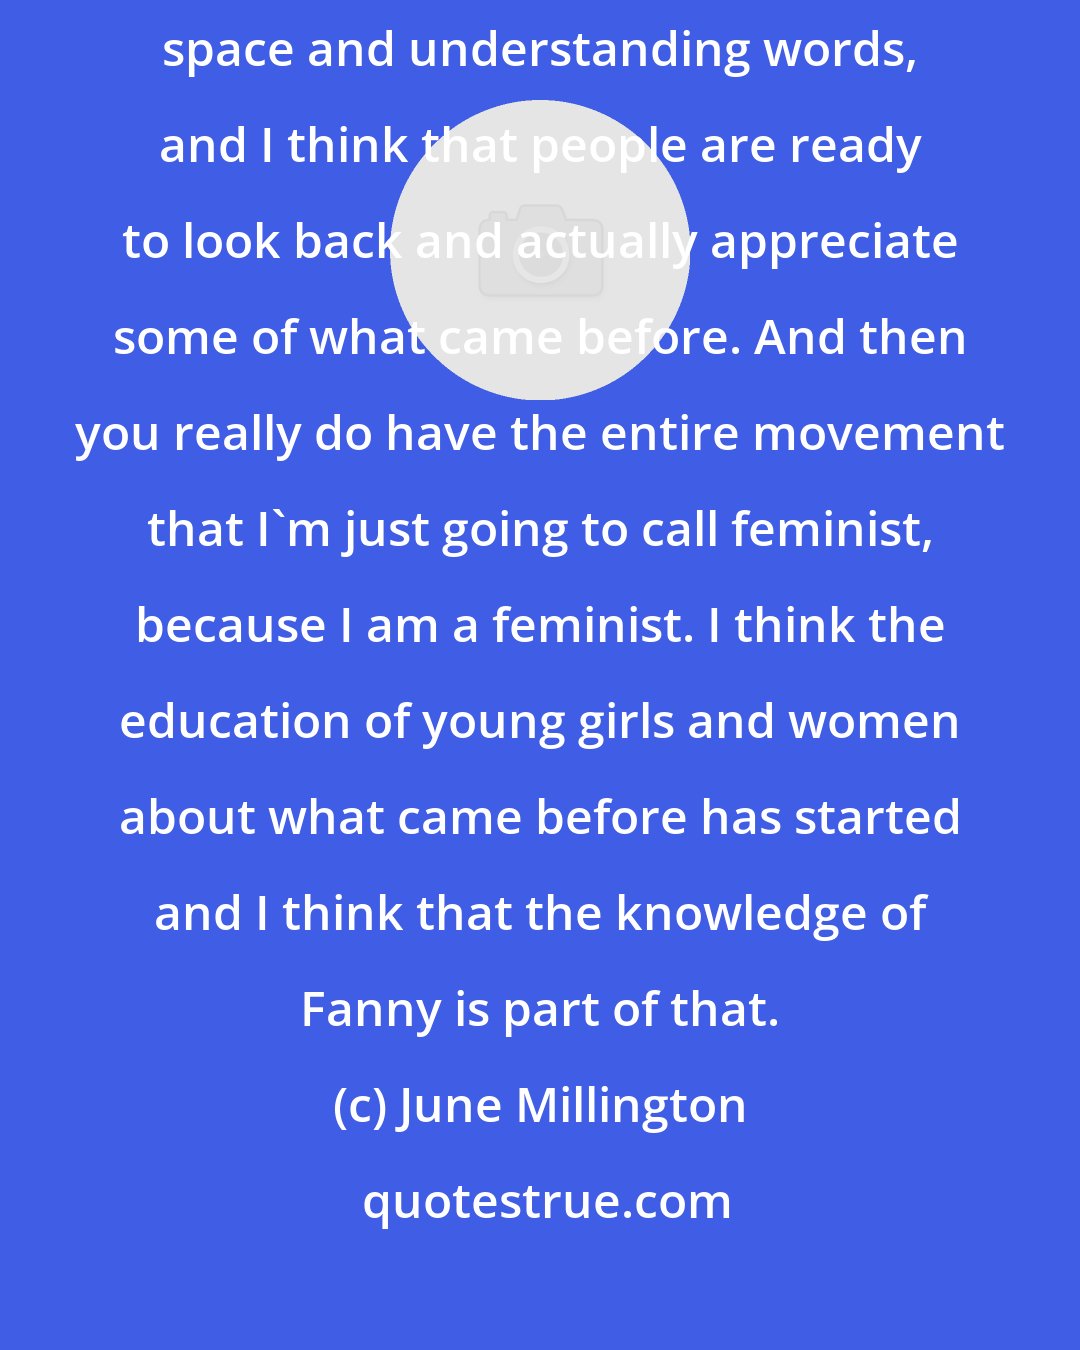 June Millington: I have this theory that people are actually really hungry for sonic space and understanding words, and I think that people are ready to look back and actually appreciate some of what came before. And then you really do have the entire movement that I'm just going to call feminist, because I am a feminist. I think the education of young girls and women about what came before has started and I think that the knowledge of Fanny is part of that.